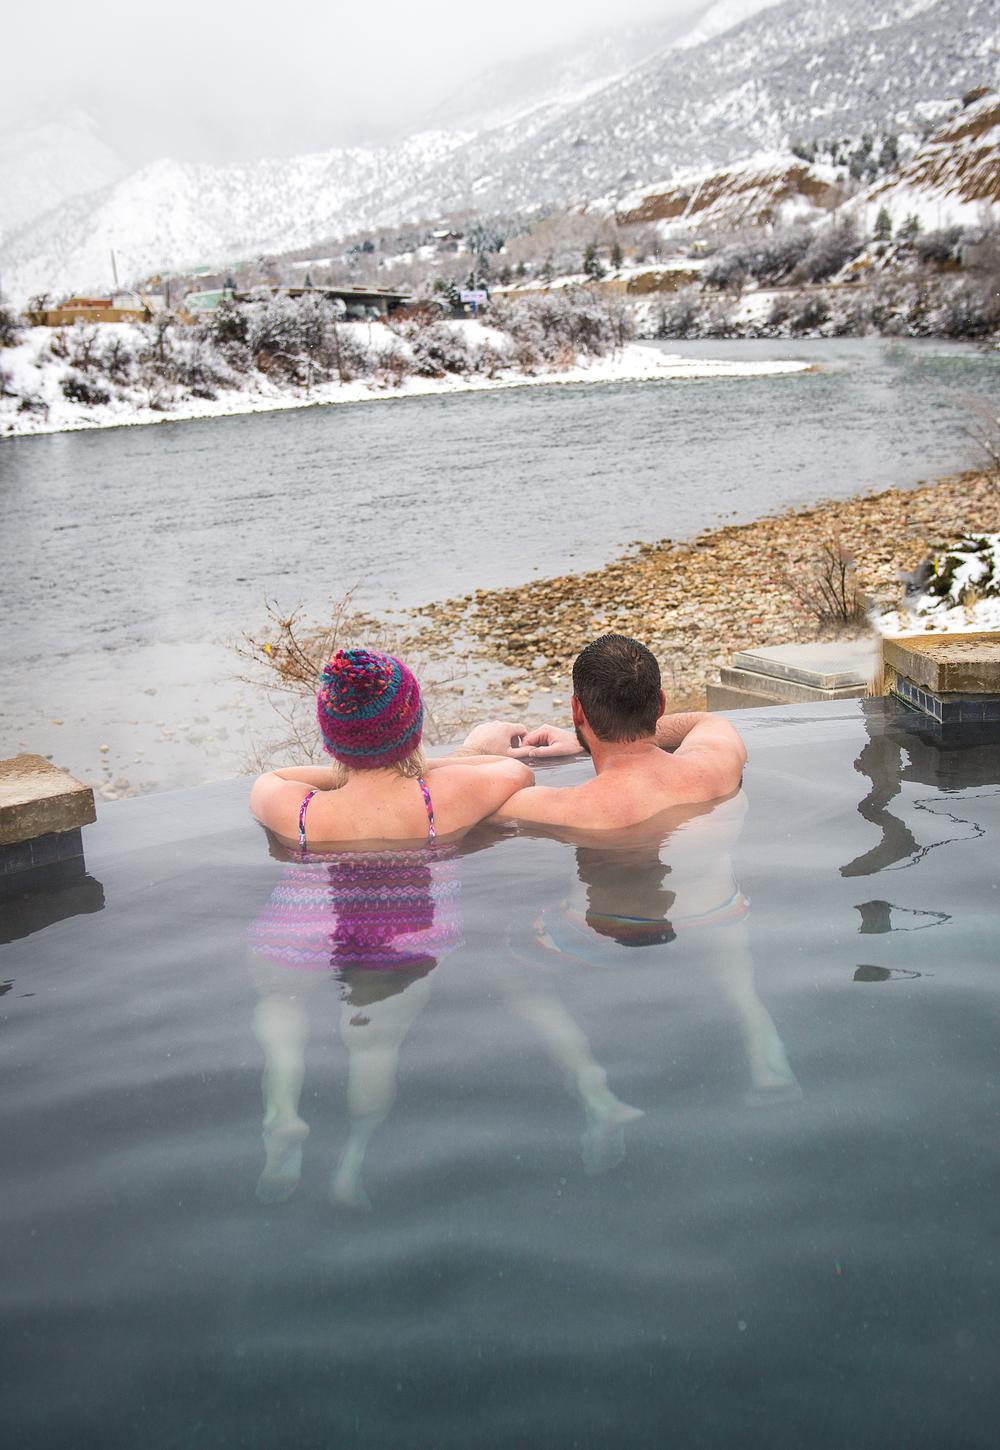 Iron Mountain Hot Springs is one of the newest facilities on the Loop